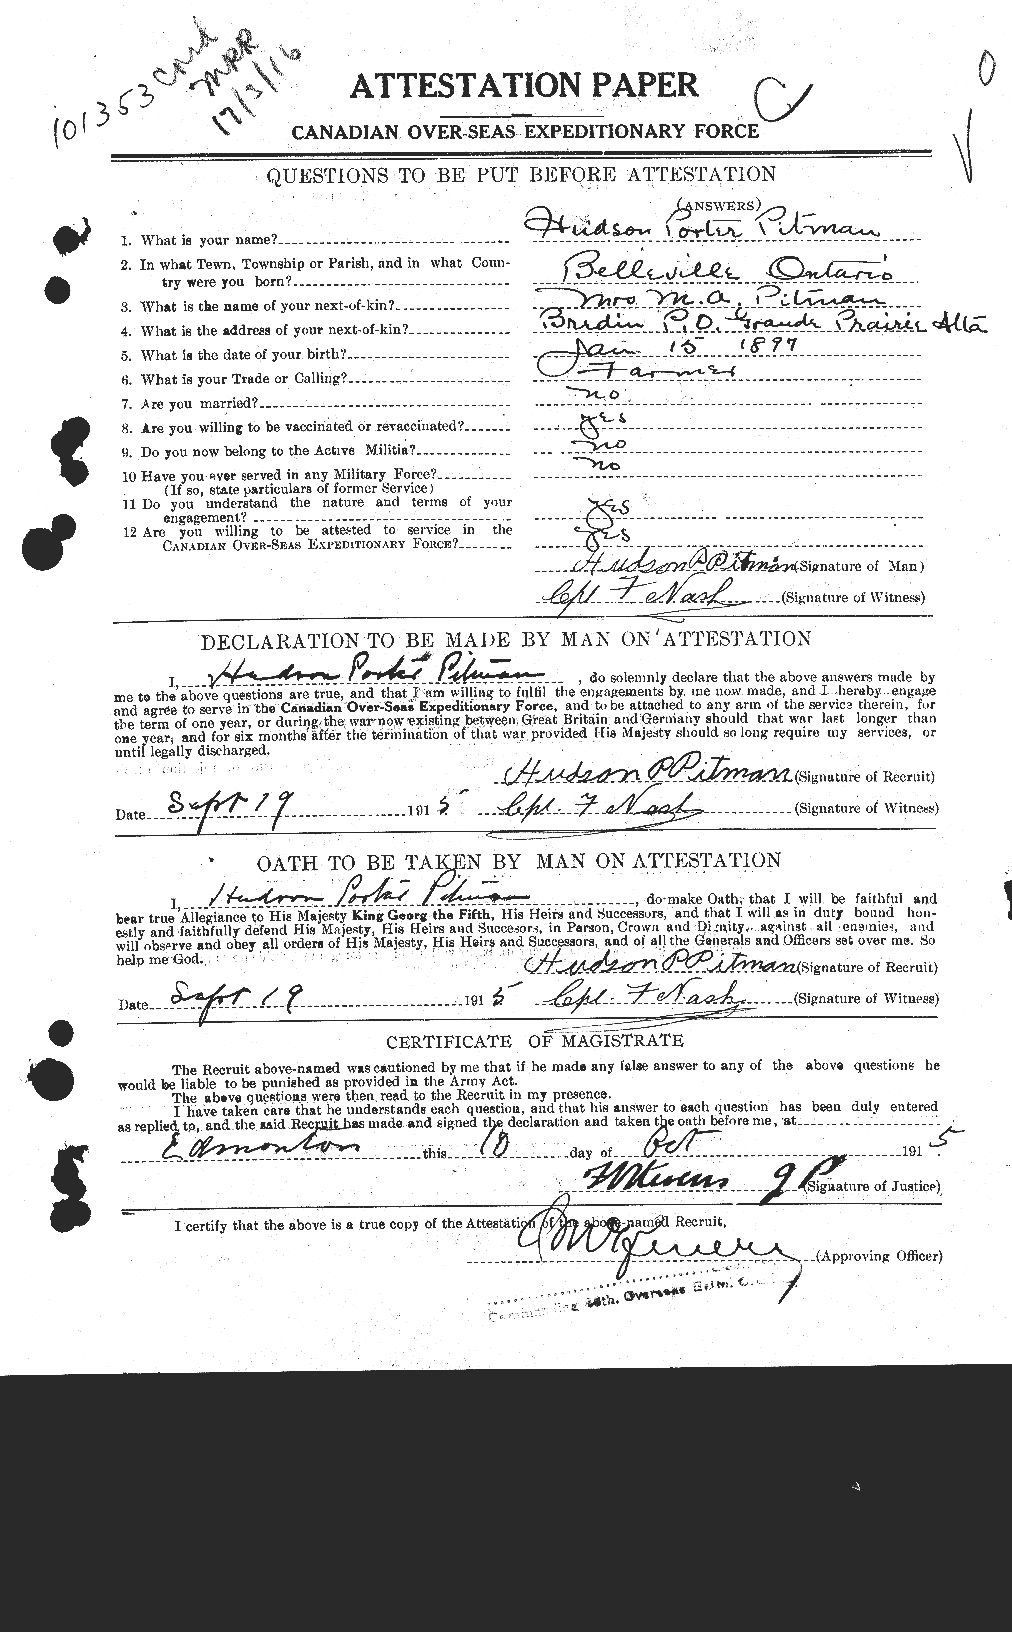 Personnel Records of the First World War - CEF 583484a